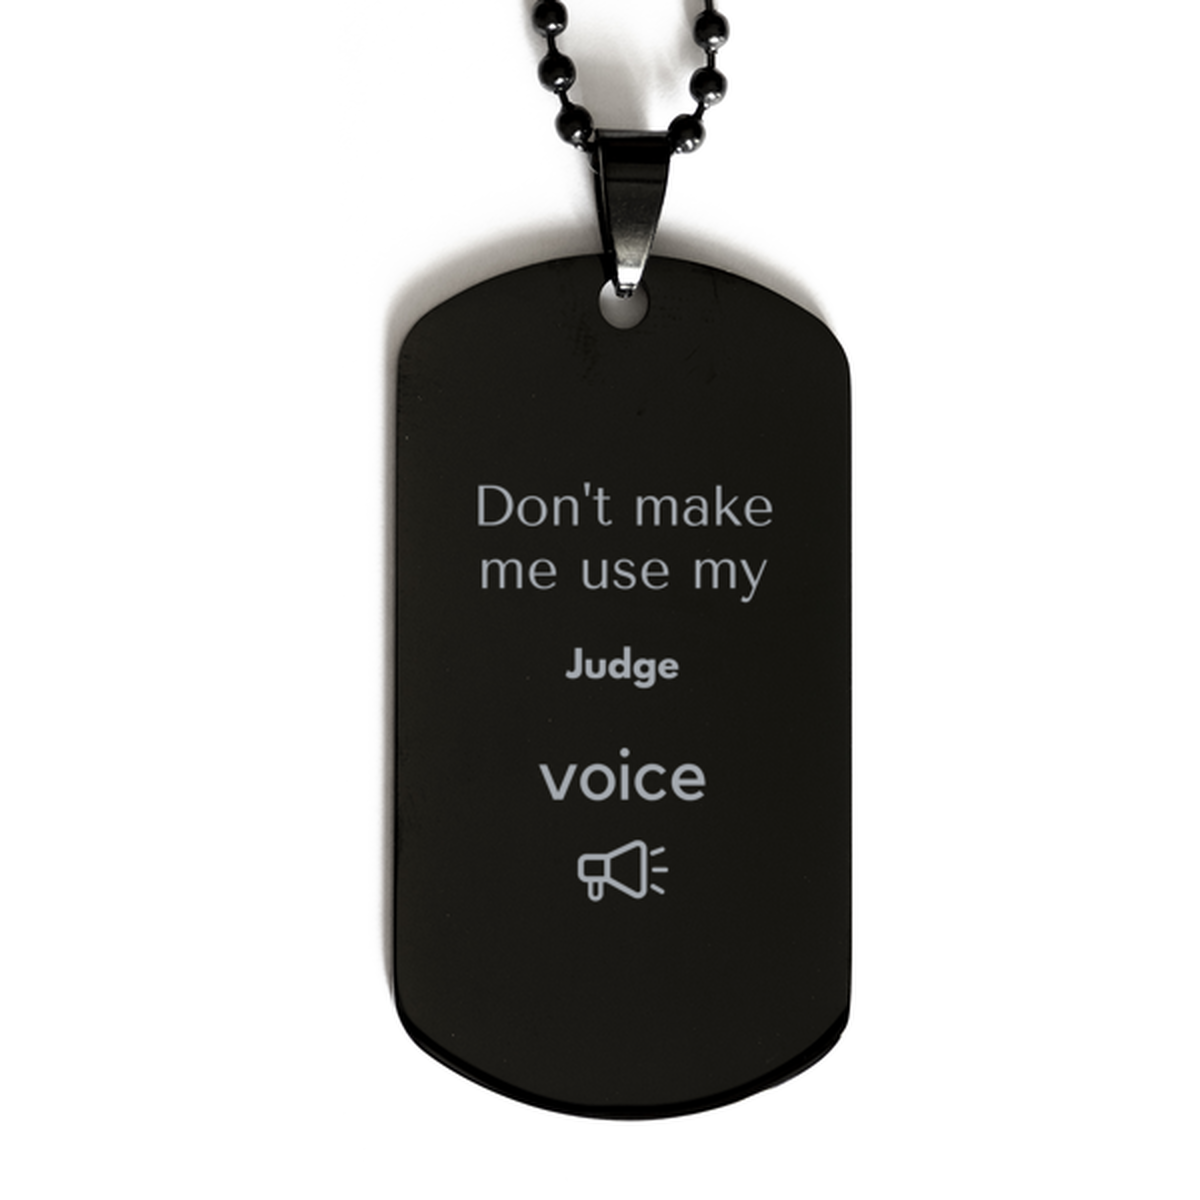 Don't make me use my Judge voice, Sarcasm Judge Gifts, Christmas Judge Black Dog Tag Birthday Unique Gifts For Judge Coworkers, Men, Women, Colleague, Friends